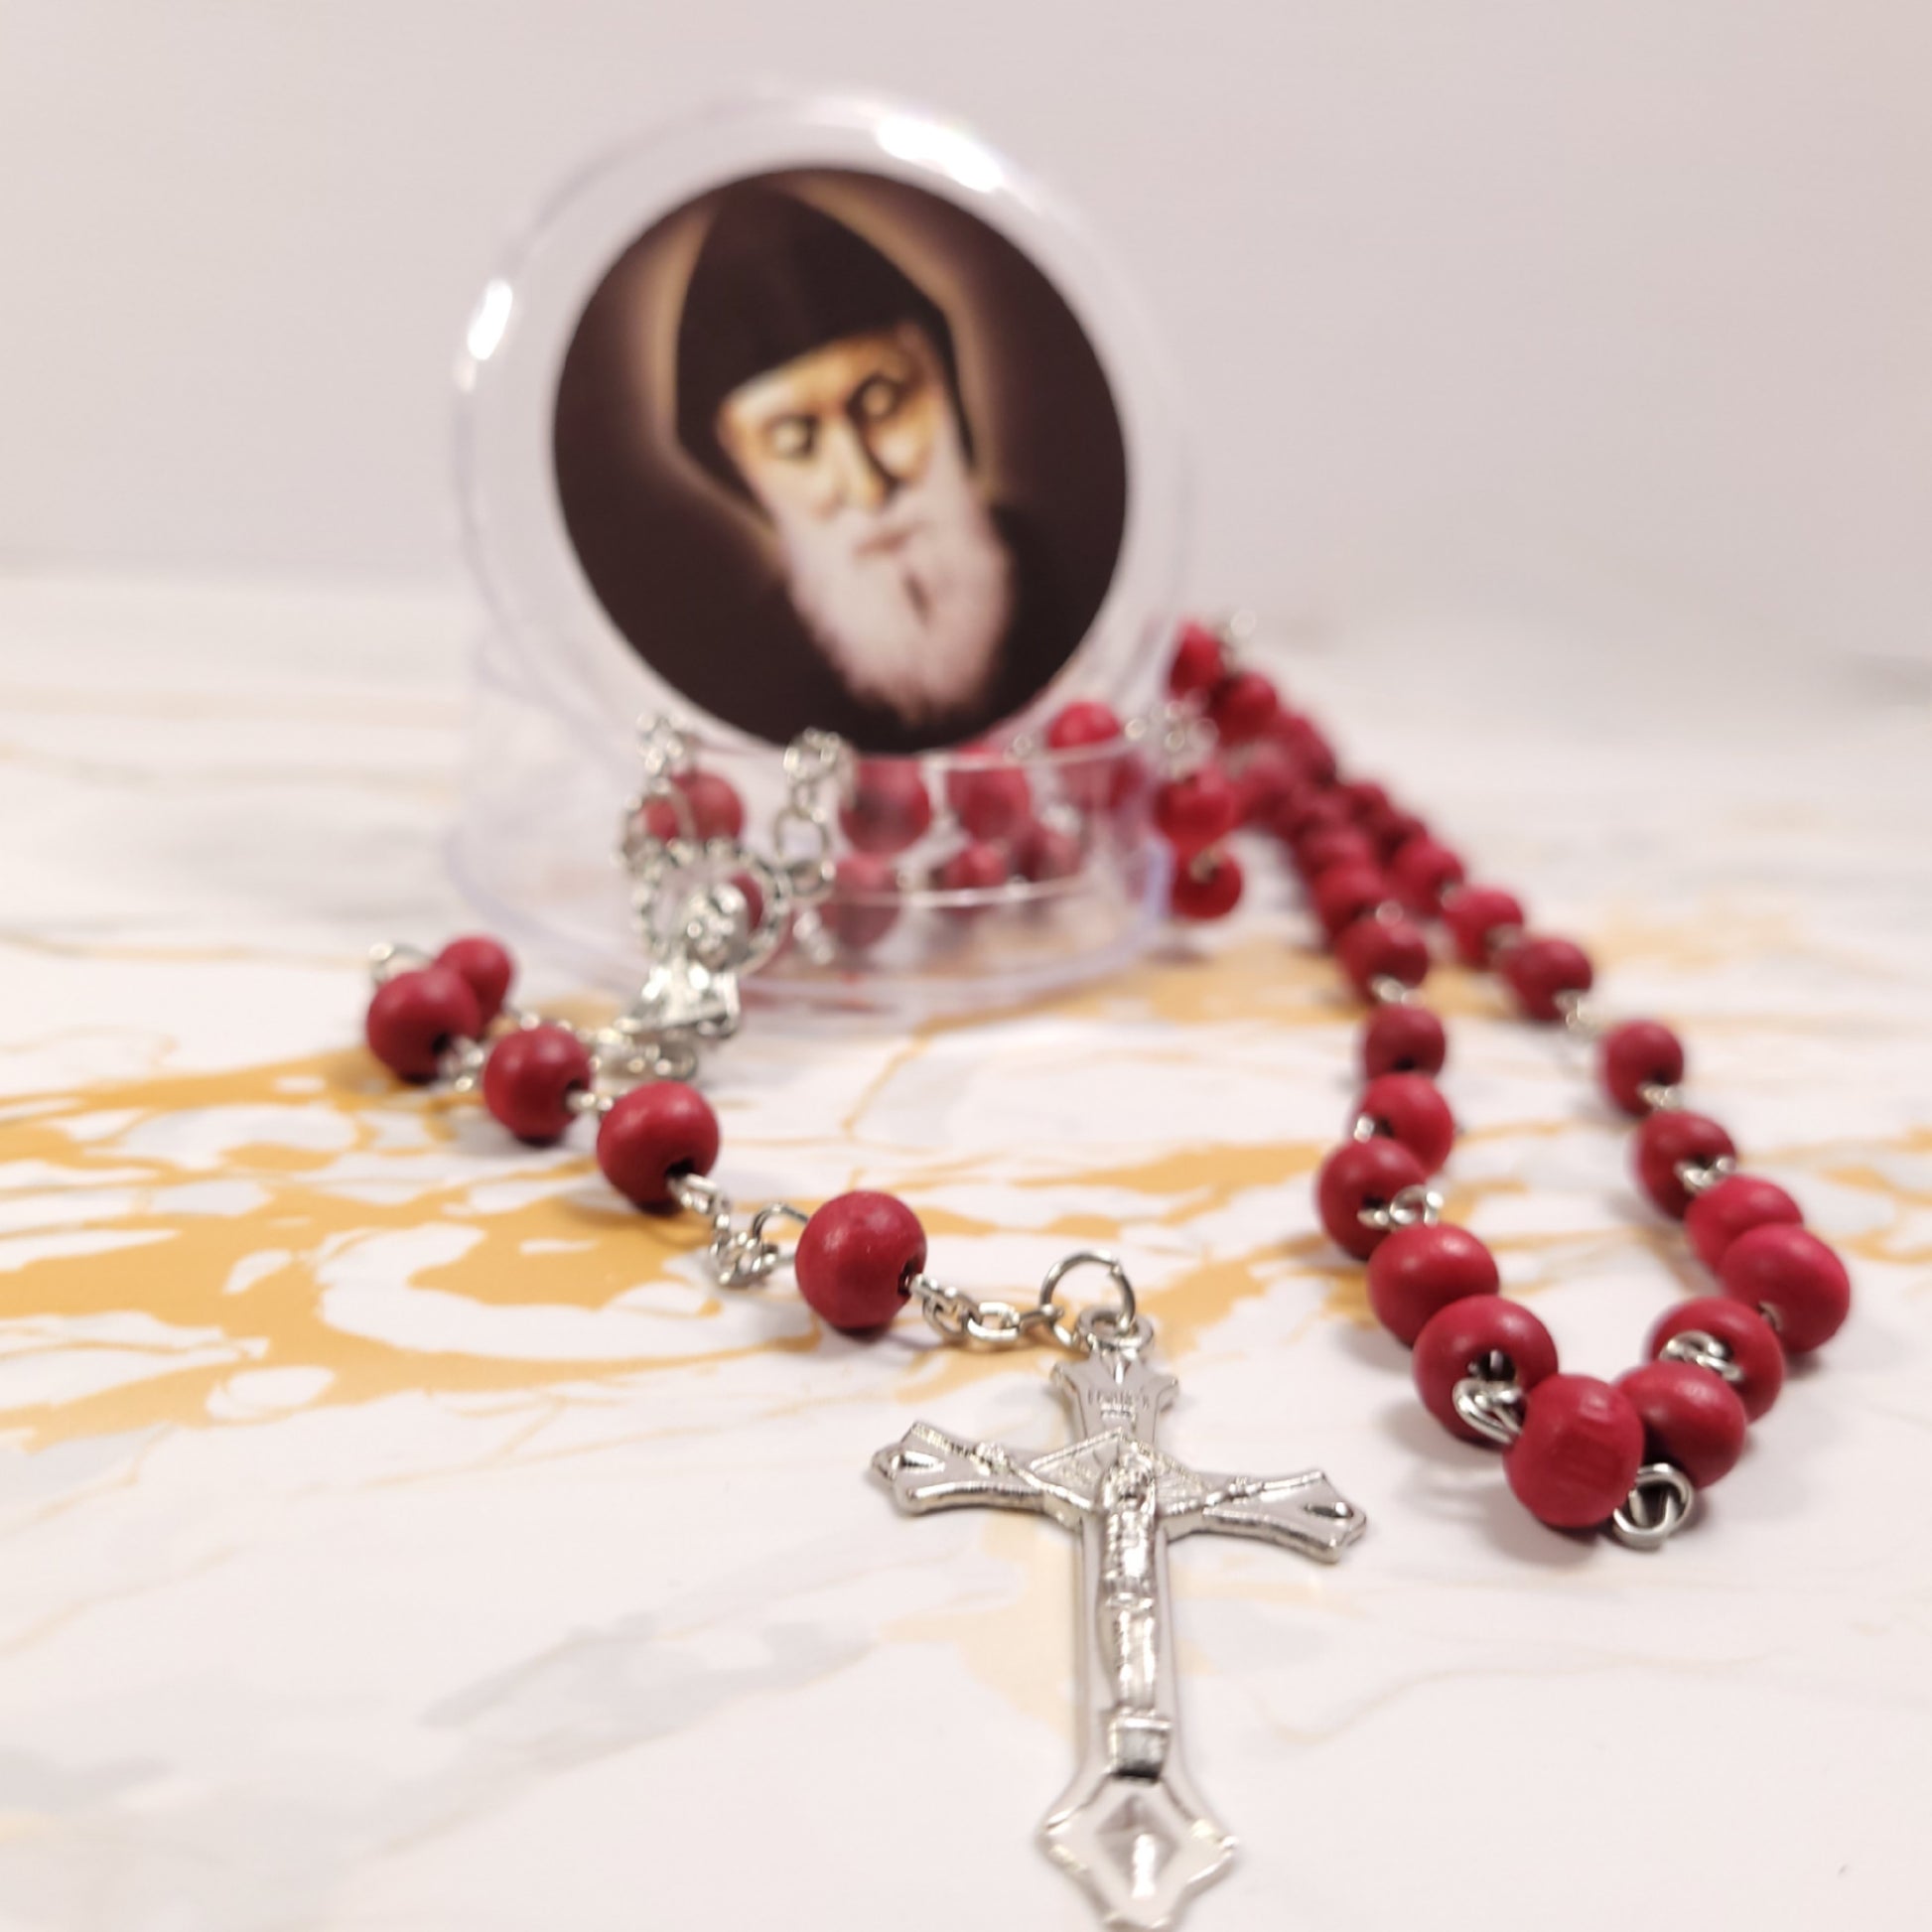 Set of oil, water, incense, soil, relic, rosary and novena booklet of Saint Charbel - Our Lady of Gifts